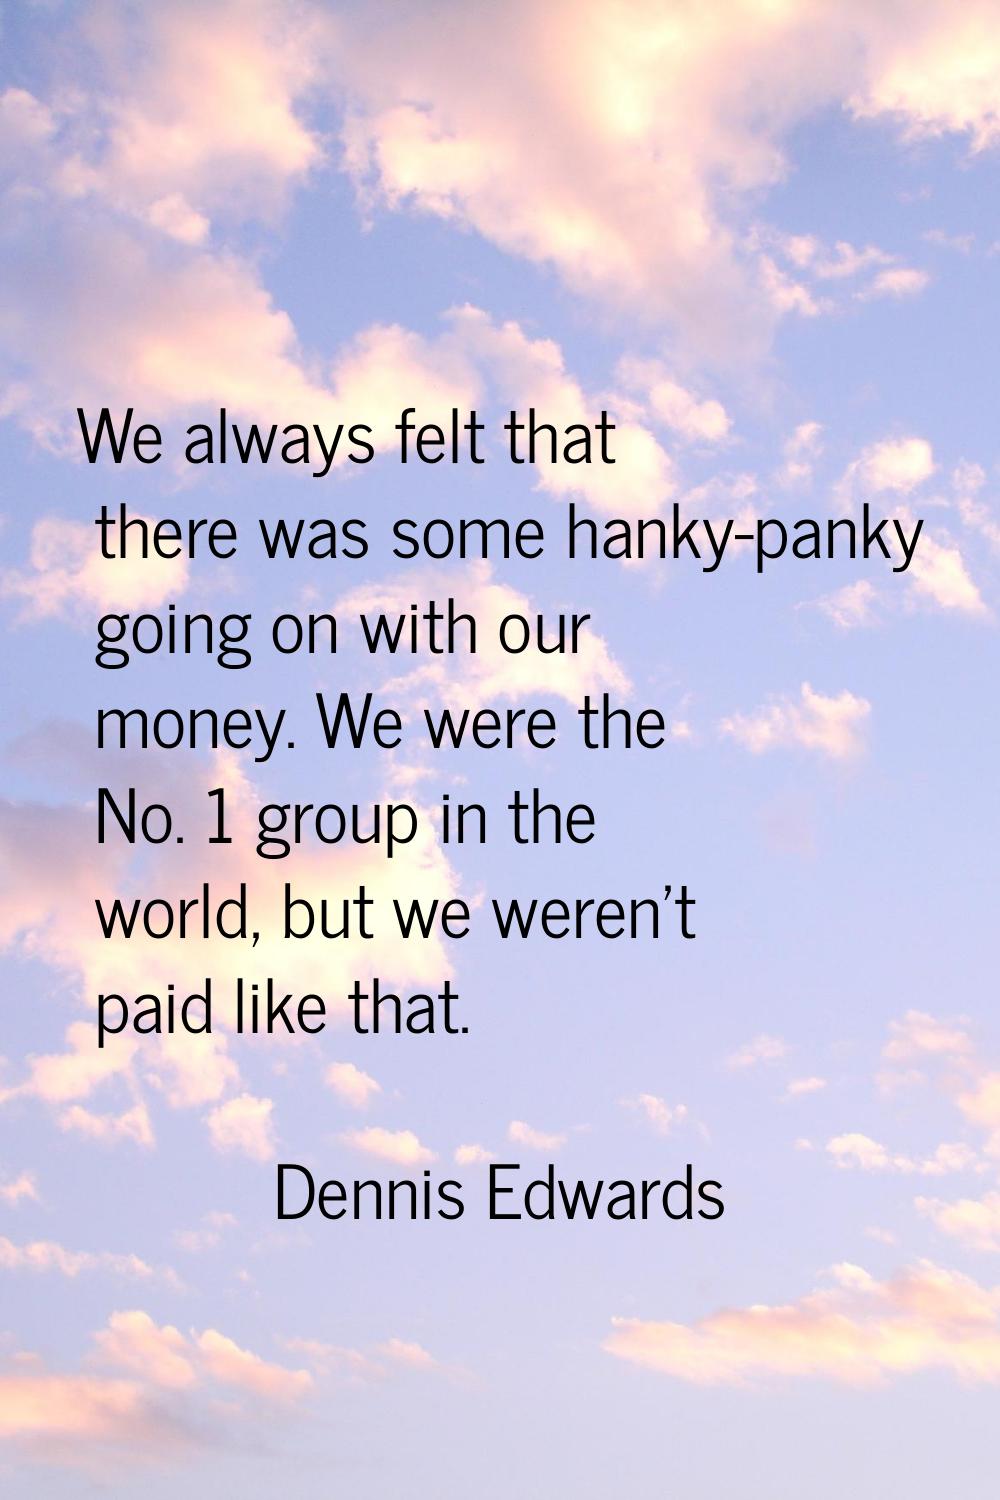 We always felt that there was some hanky-panky going on with our money. We were the No. 1 group in 